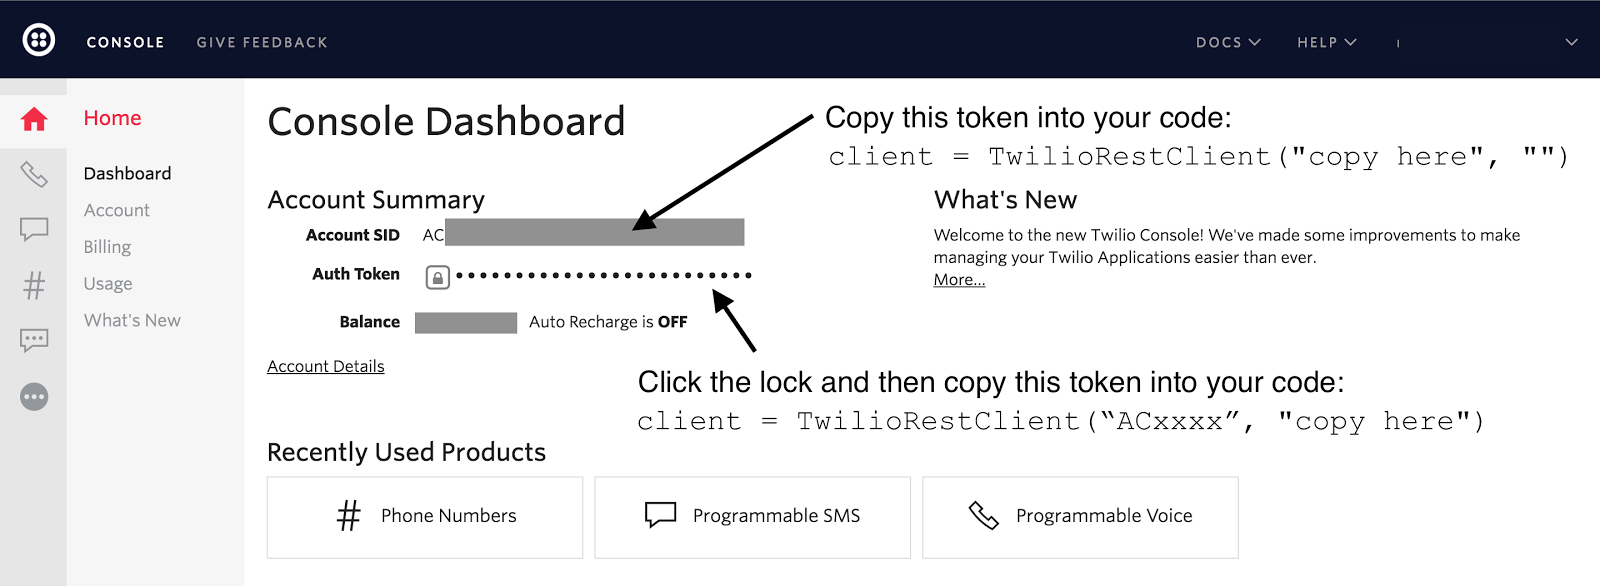 Obtain the Account SID and Auth Token from the Twilio Console.